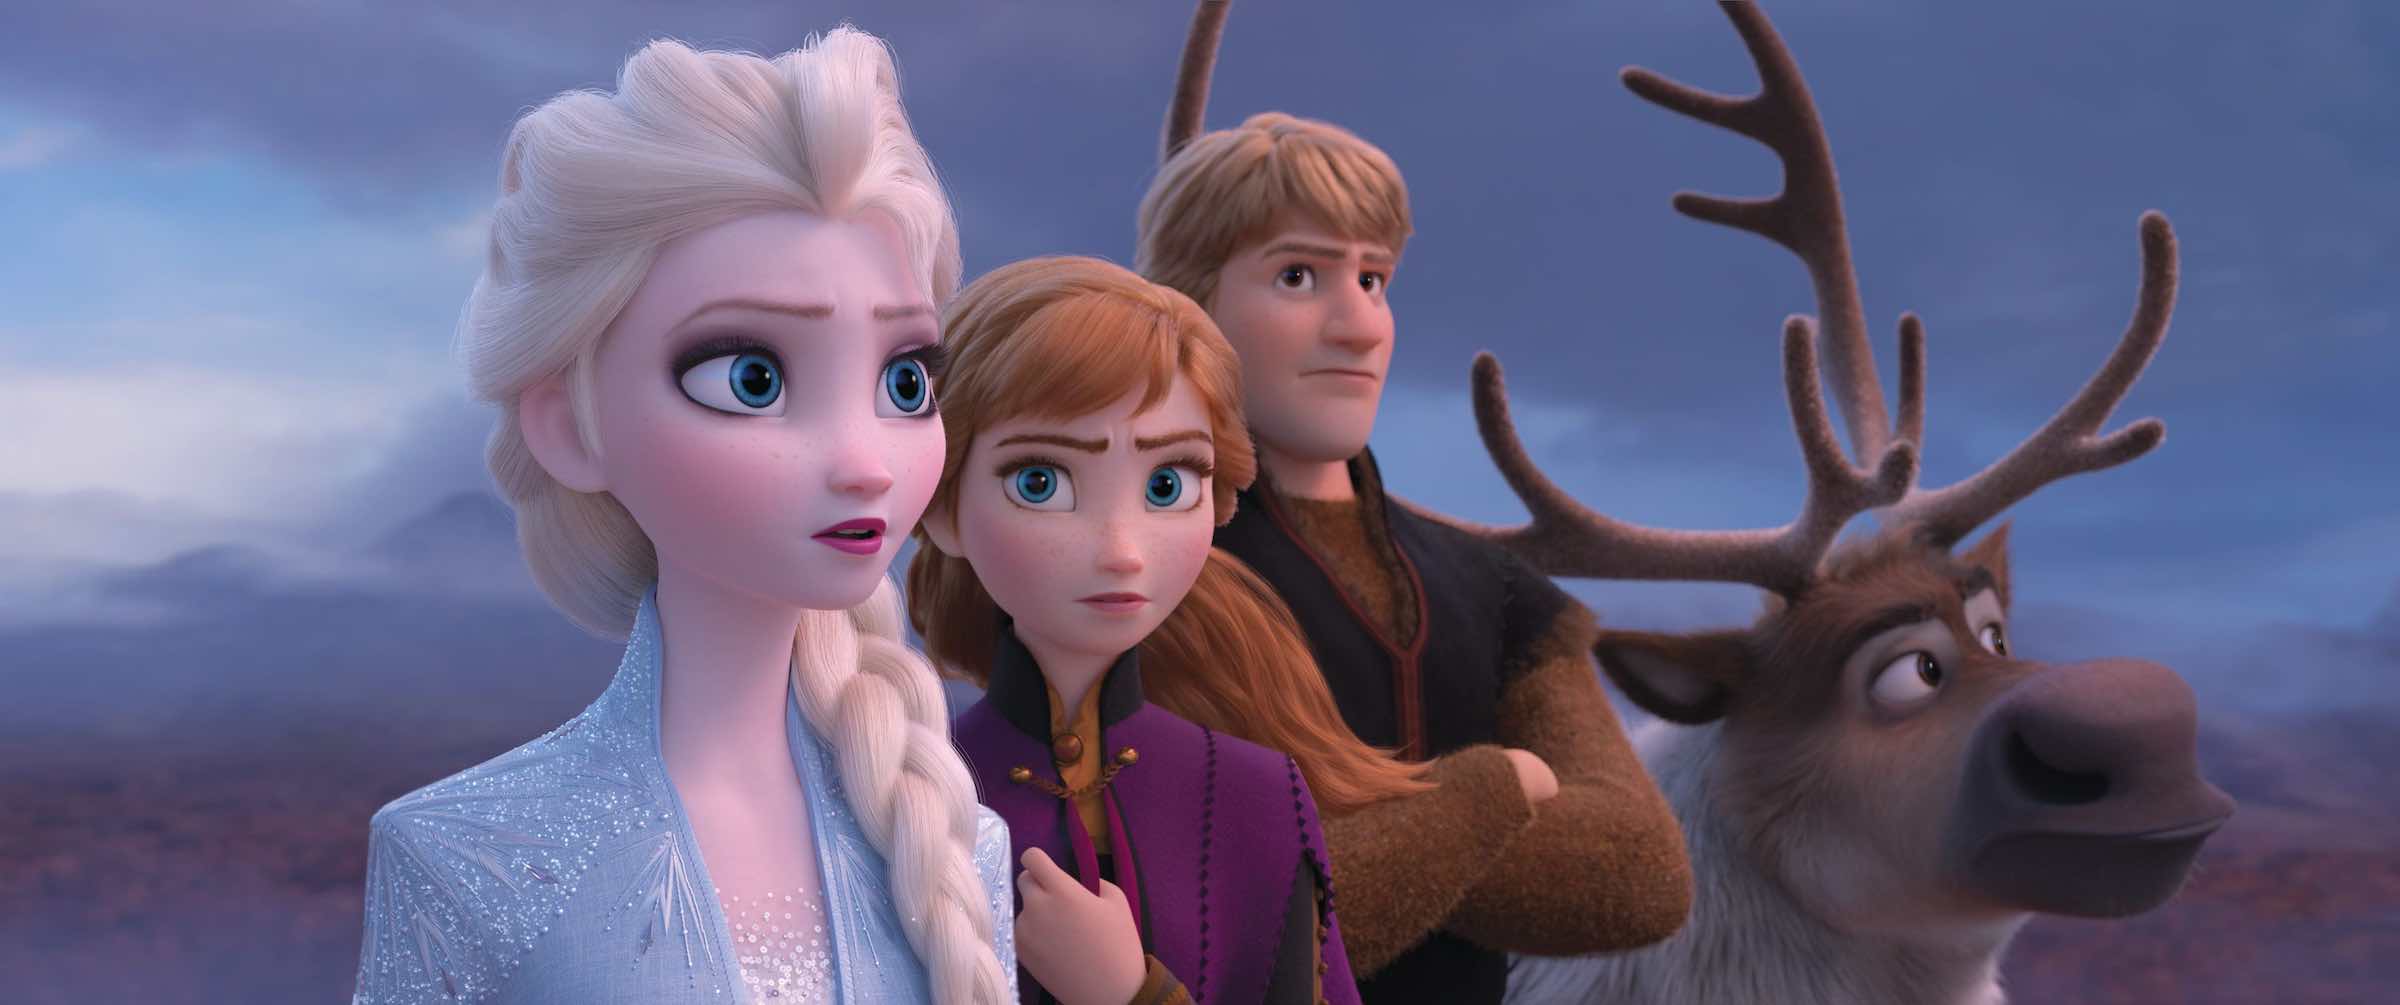 We’ve conjured up the magic and can tell you just what to expect from 'Frozen 2'. Here's what you need to know about the Disney sequel.